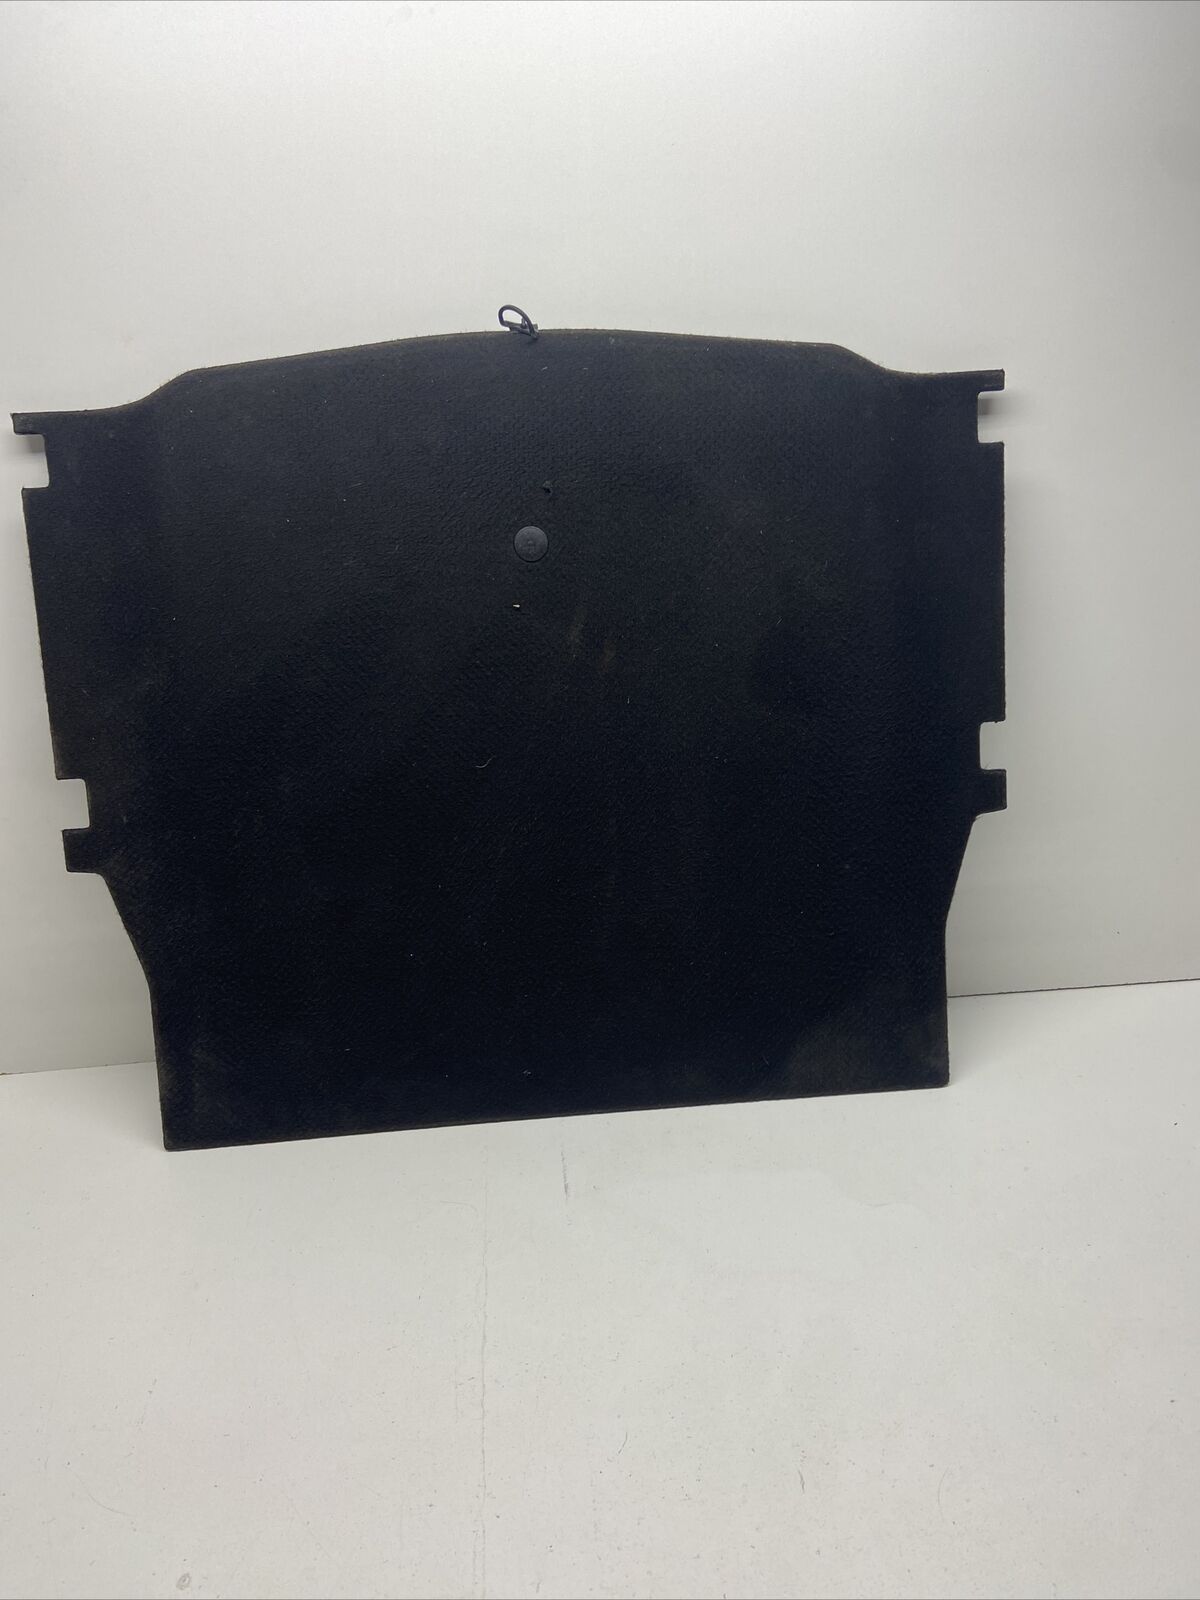 2004 BMW 325CI TRUNK LOWER SPARE TIRE COMPARMENT COVER OEM 